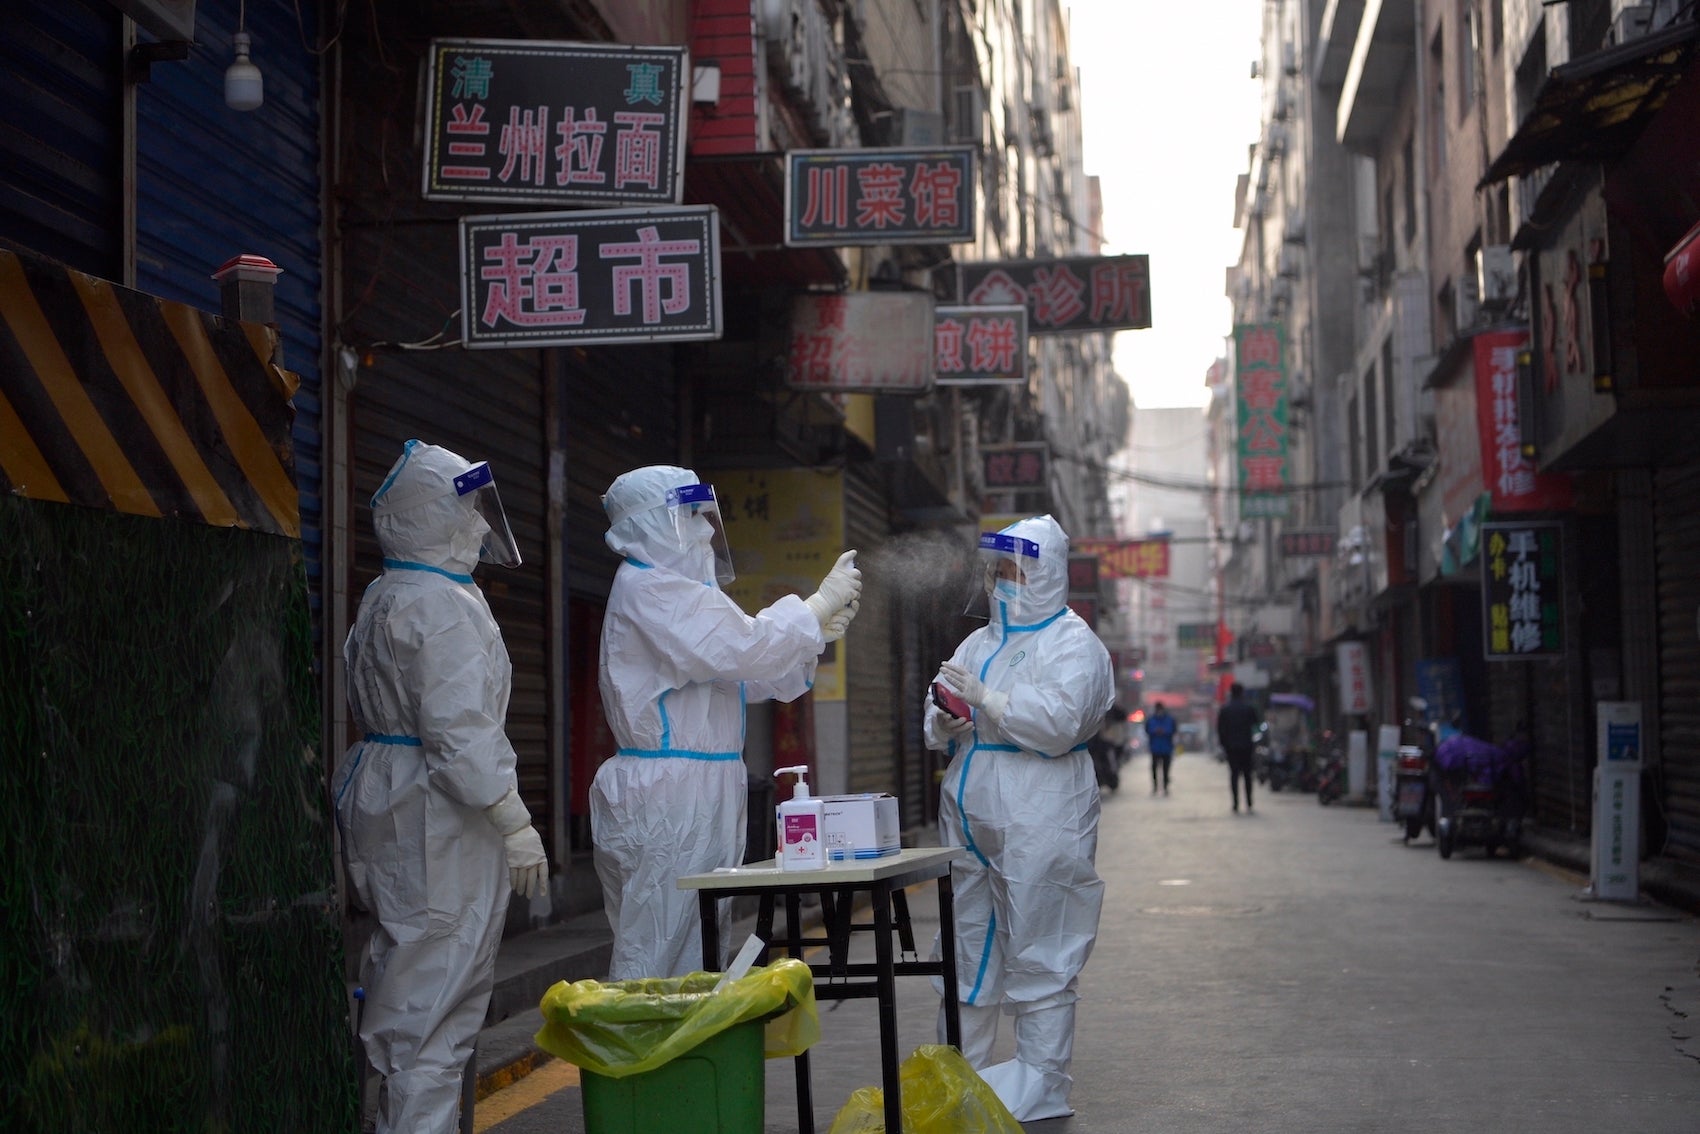 A medical worker disinfects her colleague's protective shield at a residential community under closed-off management in Xi'an, China.